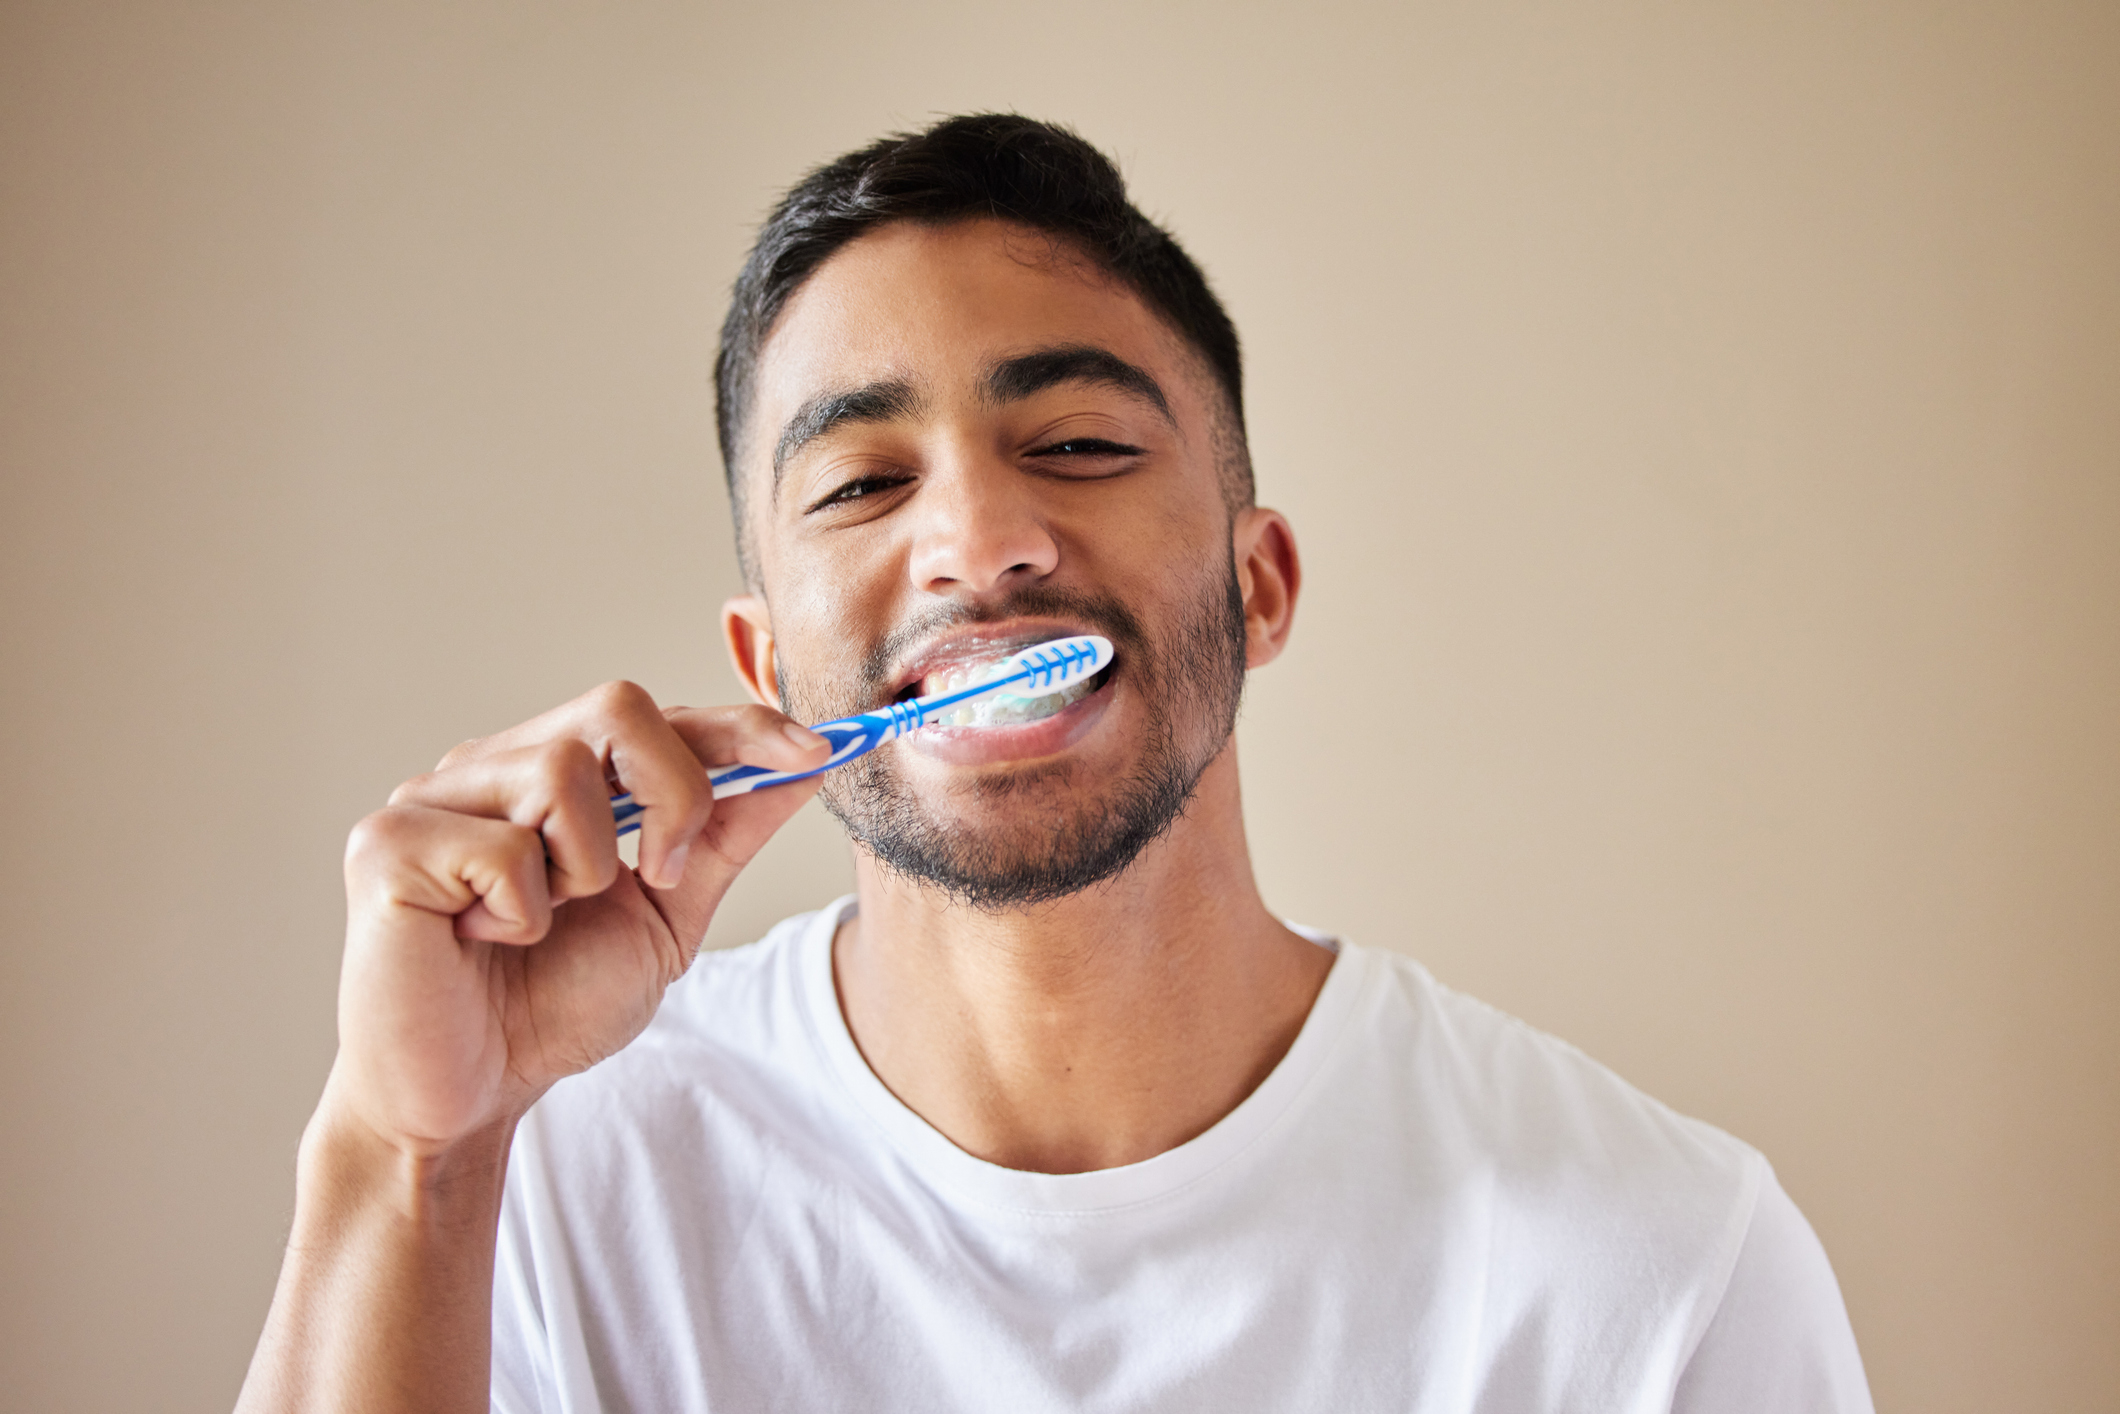 Man in white t-shirt brushing teeth, looking at camera, promoting dental hygiene for parents article